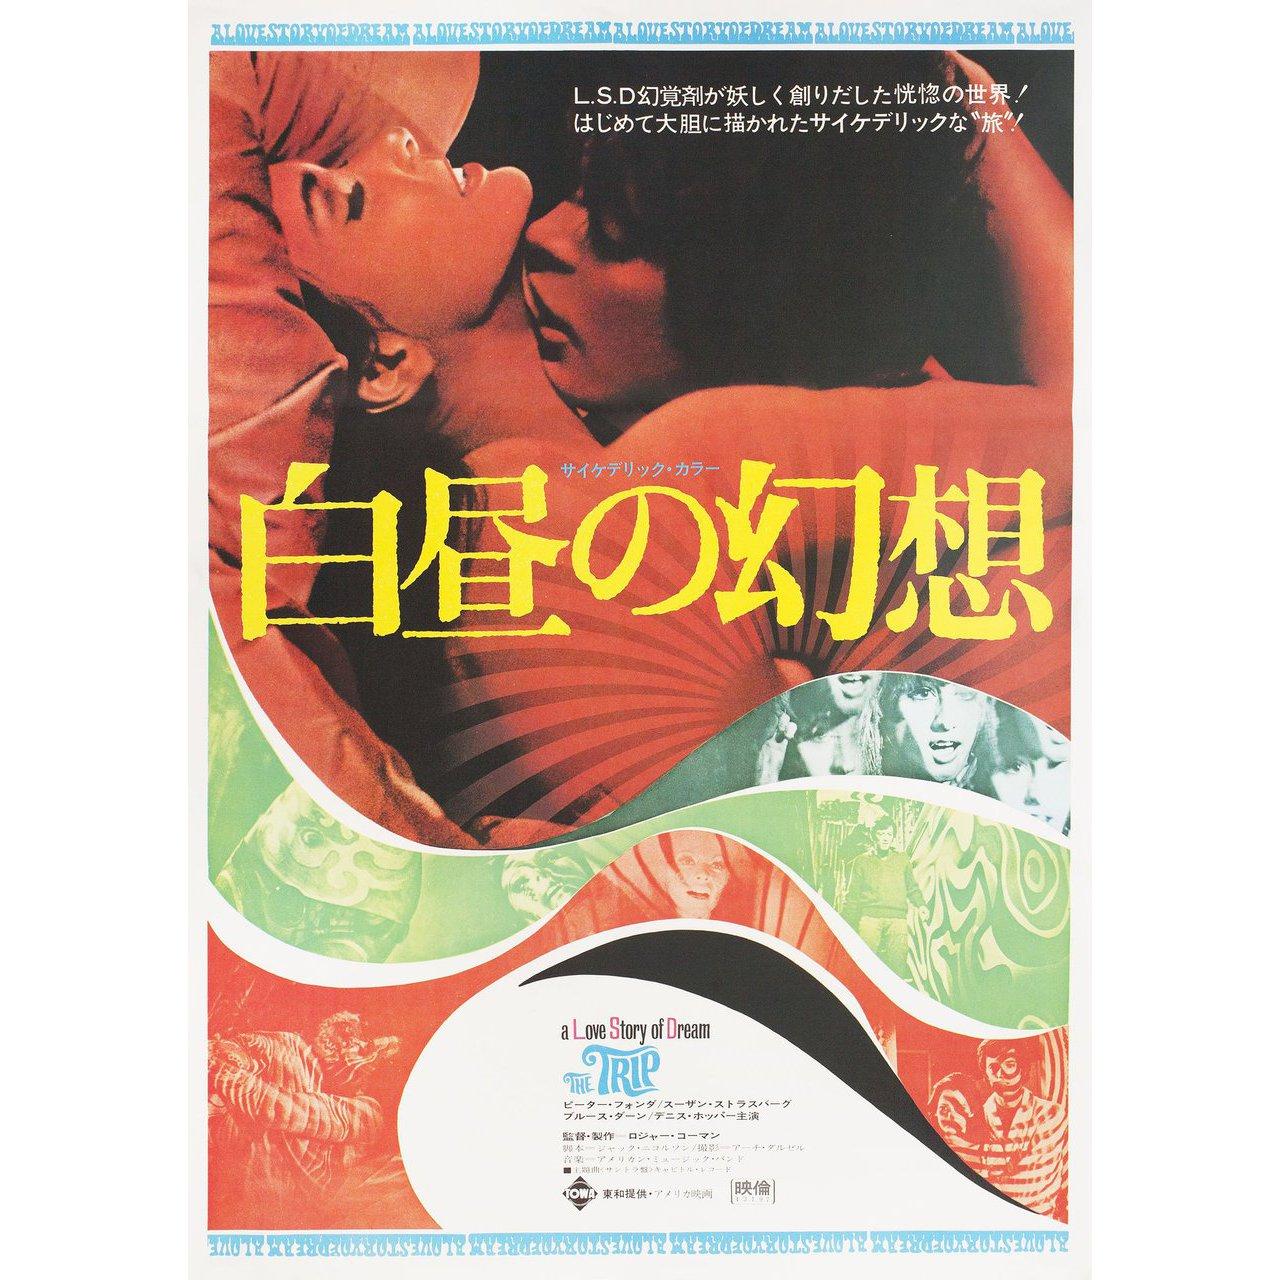 Original 1968 Japanese B2 poster for the film “The Trip” directed by Roger Corman with Peter Fonda / Susan Strasberg / Bruce Dern / Dennis Hopper. Very good-fine condition, rolled. Please note: the size is stated in inches and the actual size can